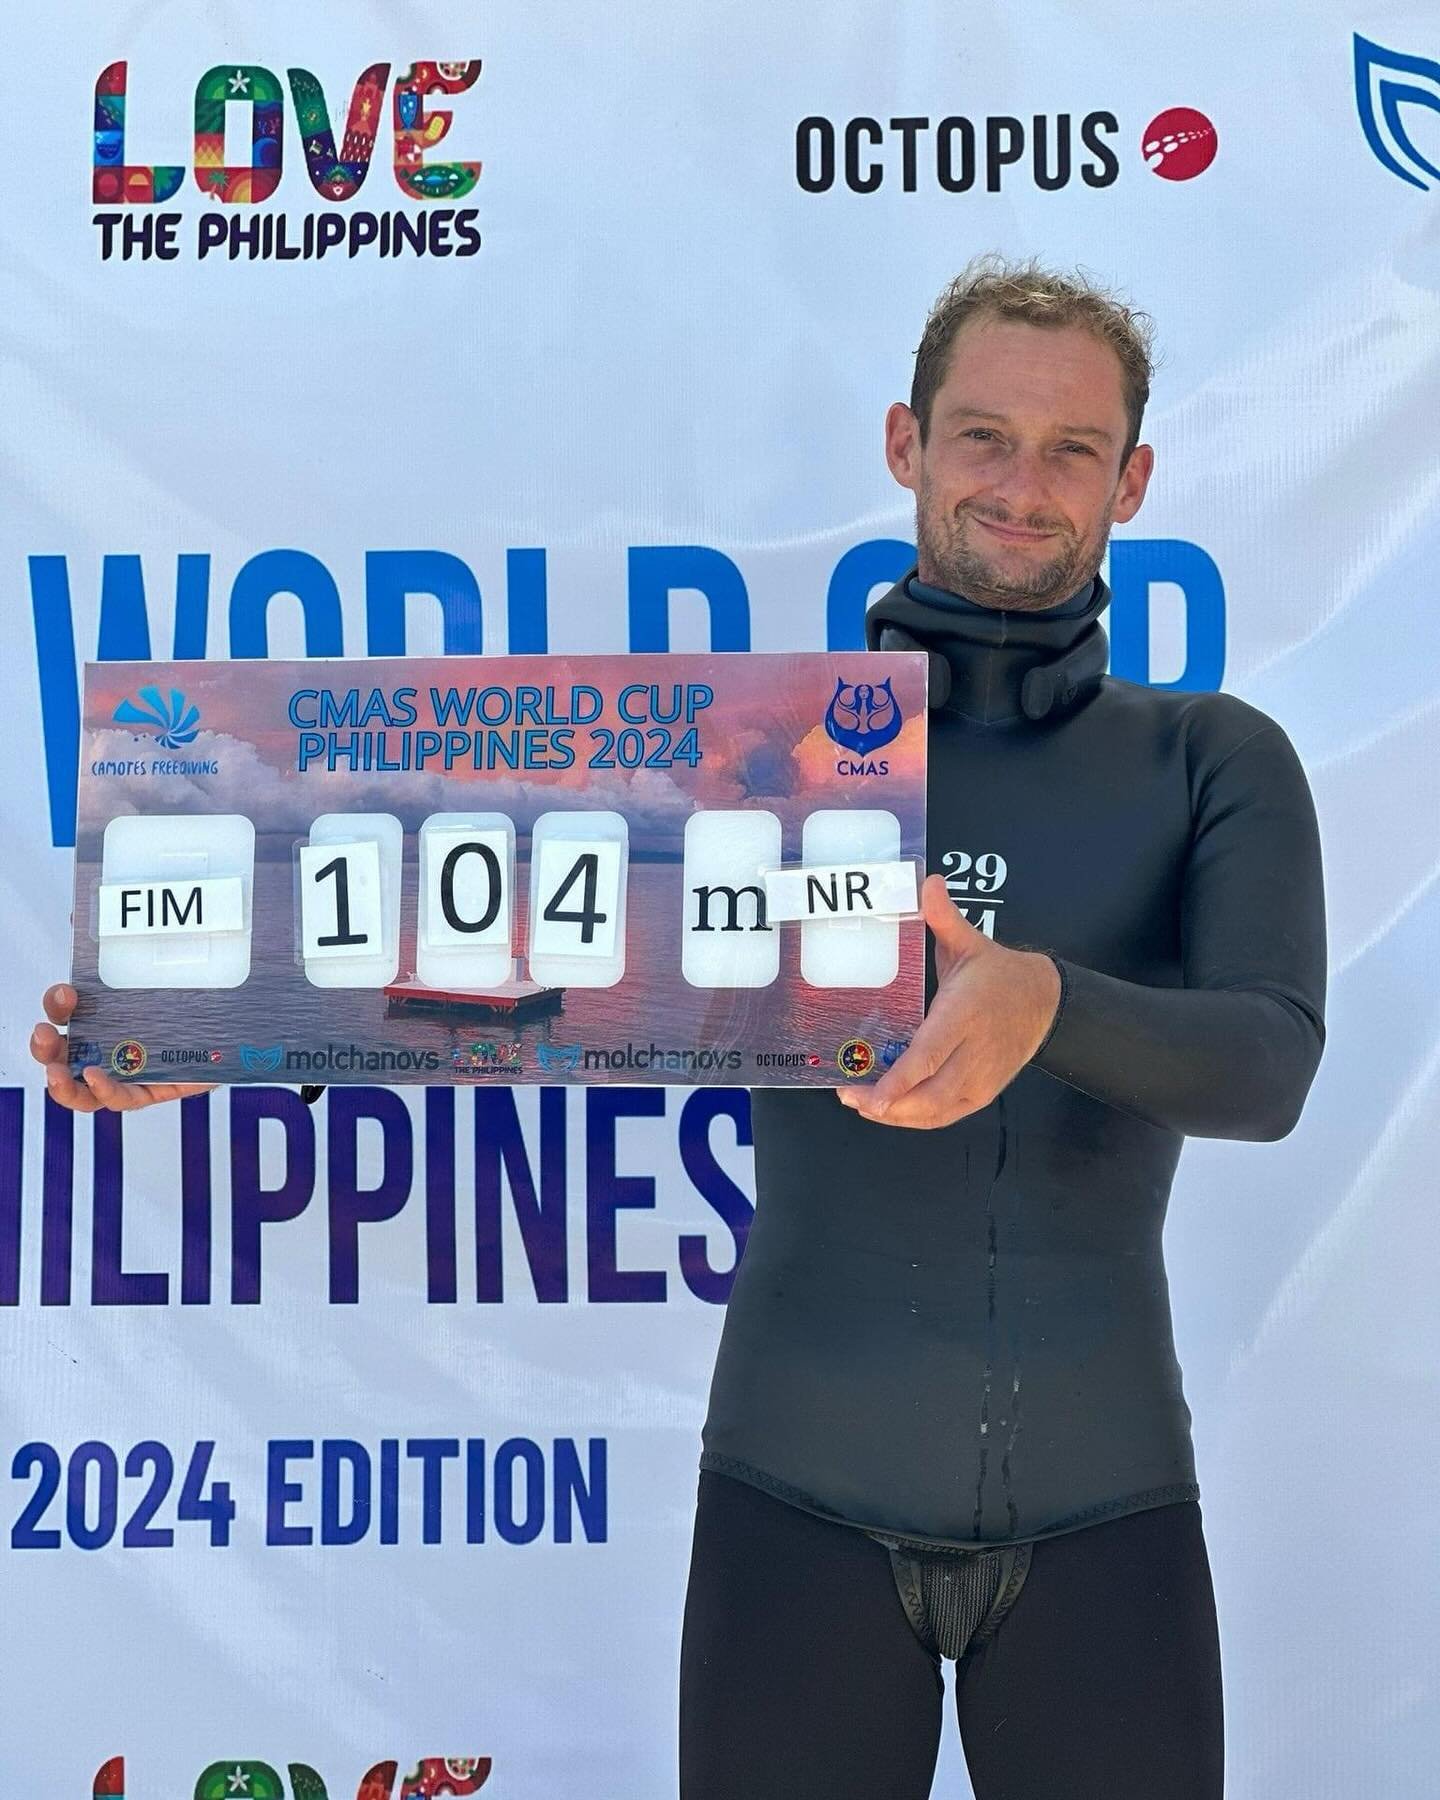 🎉🏅 Huge congratulations to our very own jedi instructor @matt_hill1992 for setting a new UK record with an incredible 104m dive without fins (FIM) at the CMAS World Cup 2024 in the Philippines! 🌊🏆

You&rsquo;ve just set the bar deep... like reall